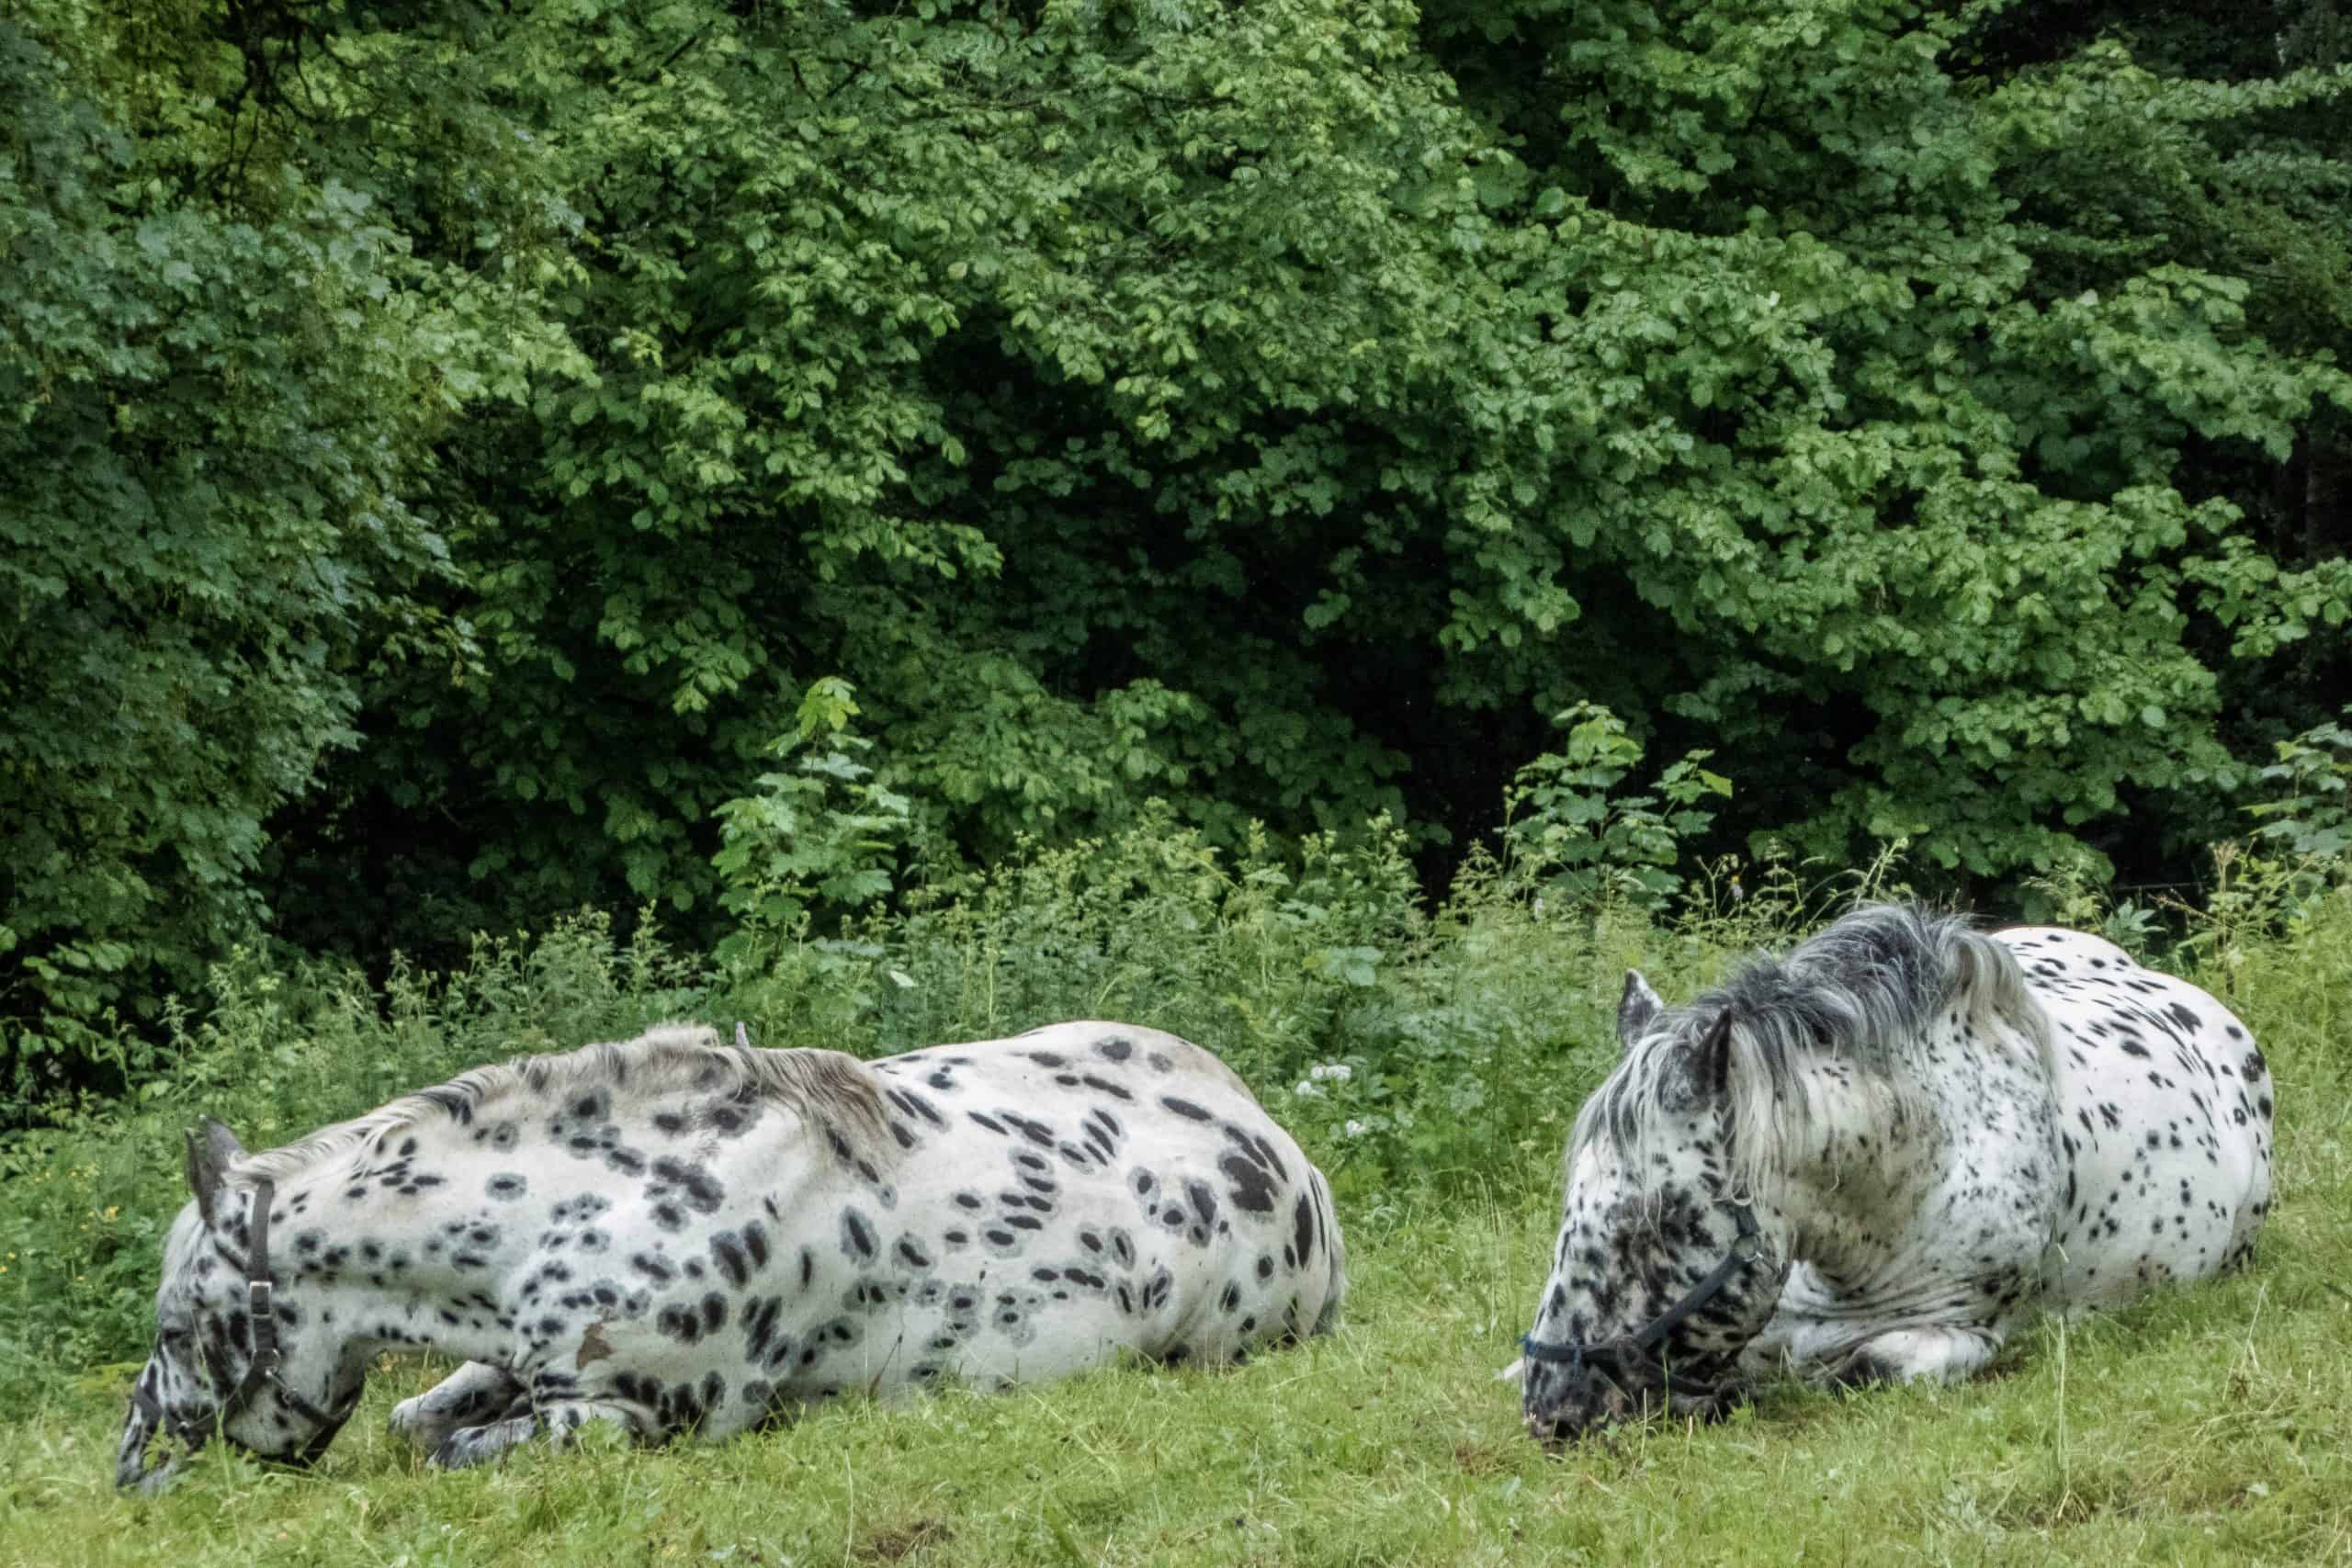 Knabstrupper is a danish horse breed, with an unusual coat pattern from solid white to full leopard spotted. Photograph taken near Kreuth, Bavaria, Germany.